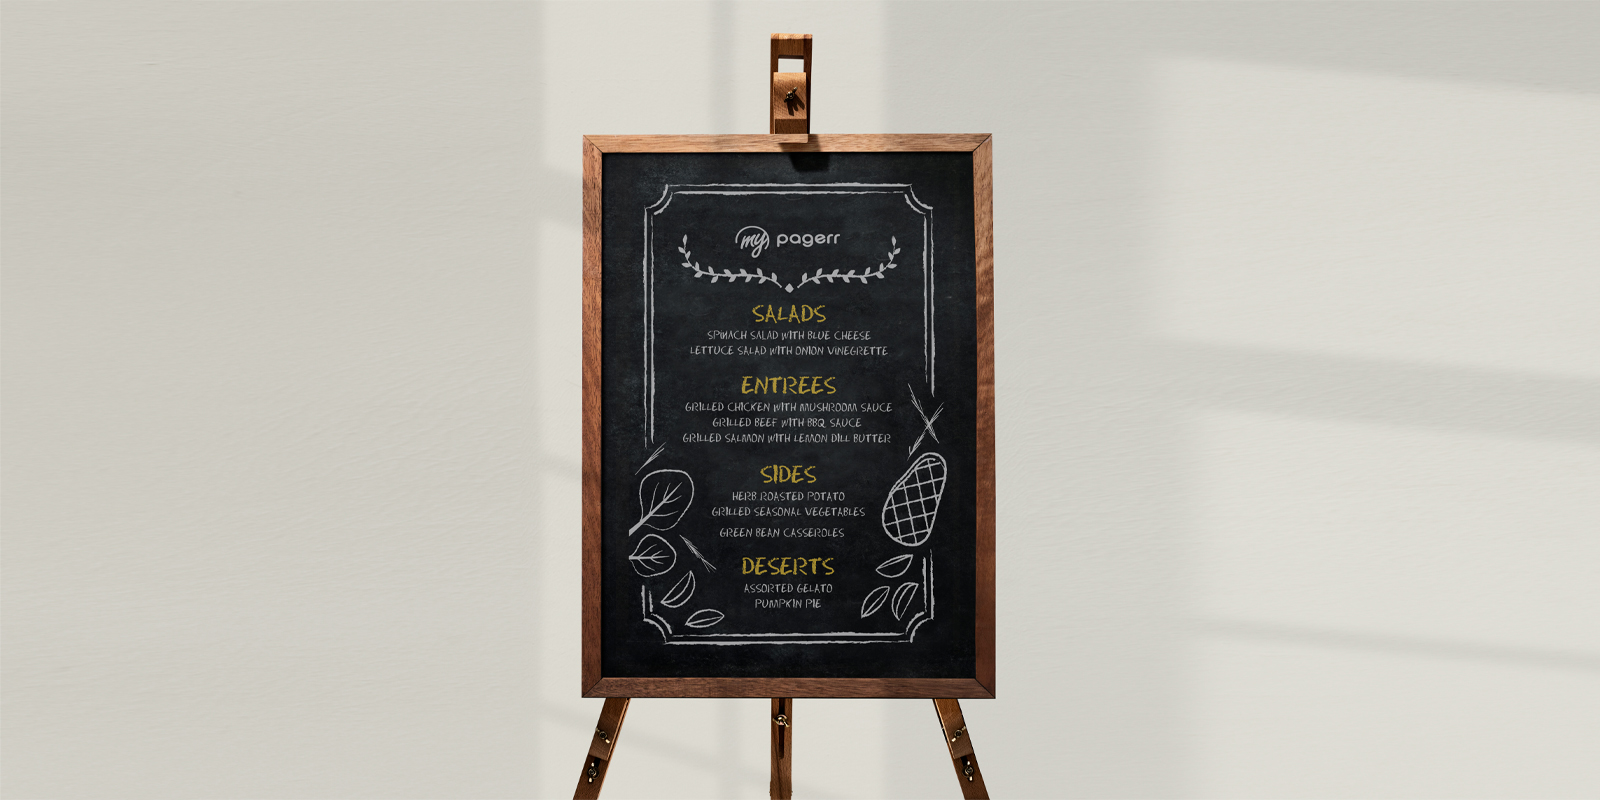 Chalkboard signs in Warsaw - Print with Pagerr